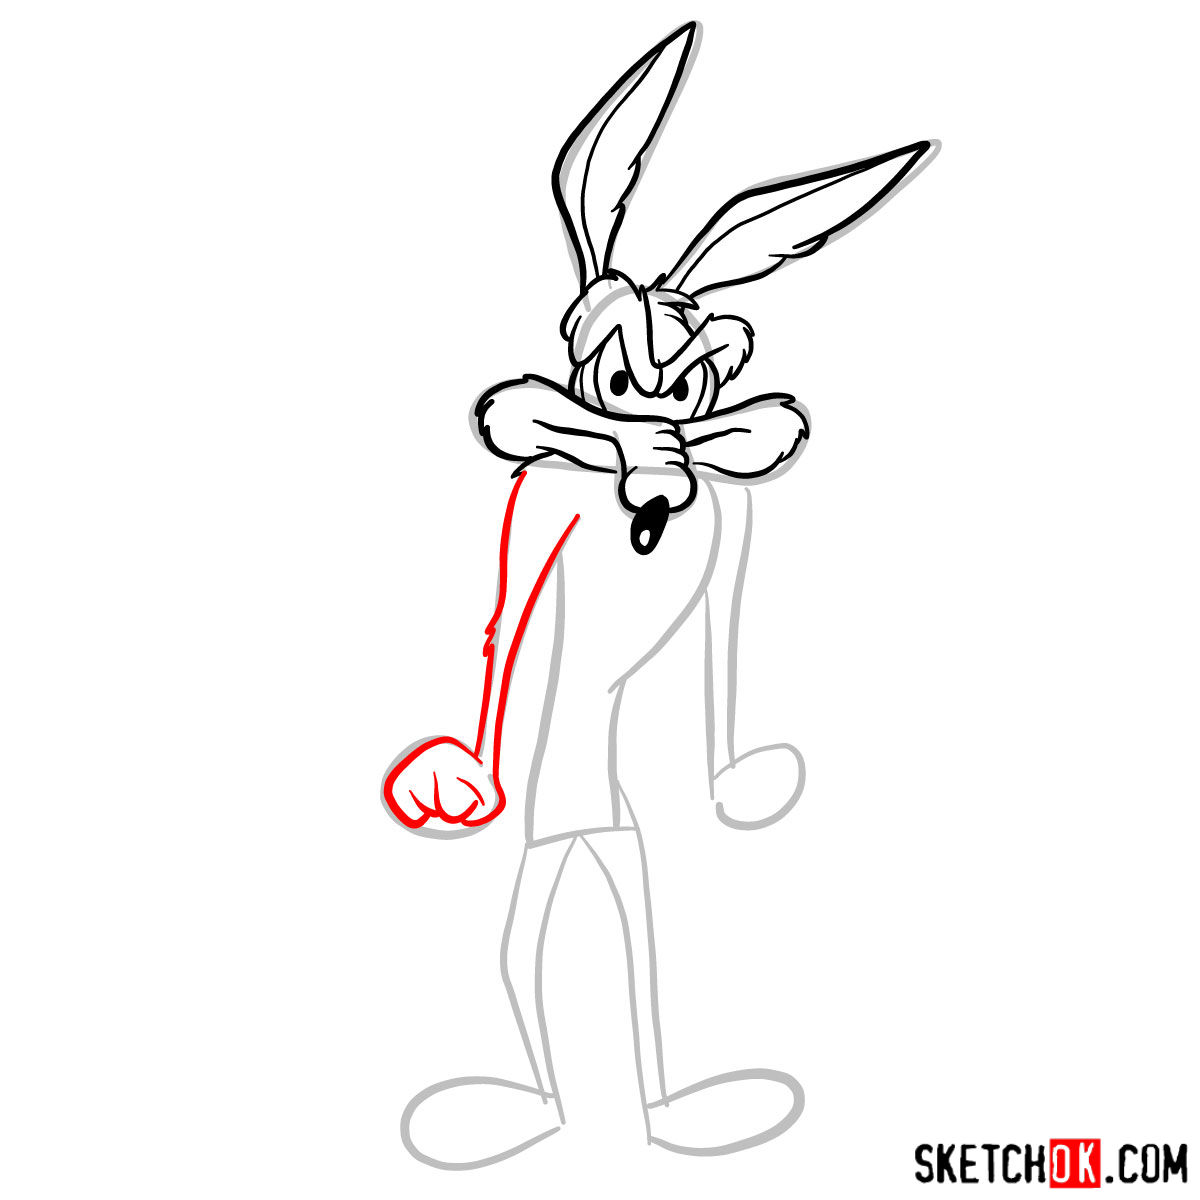 How to draw Wile E. Coyote - step 05